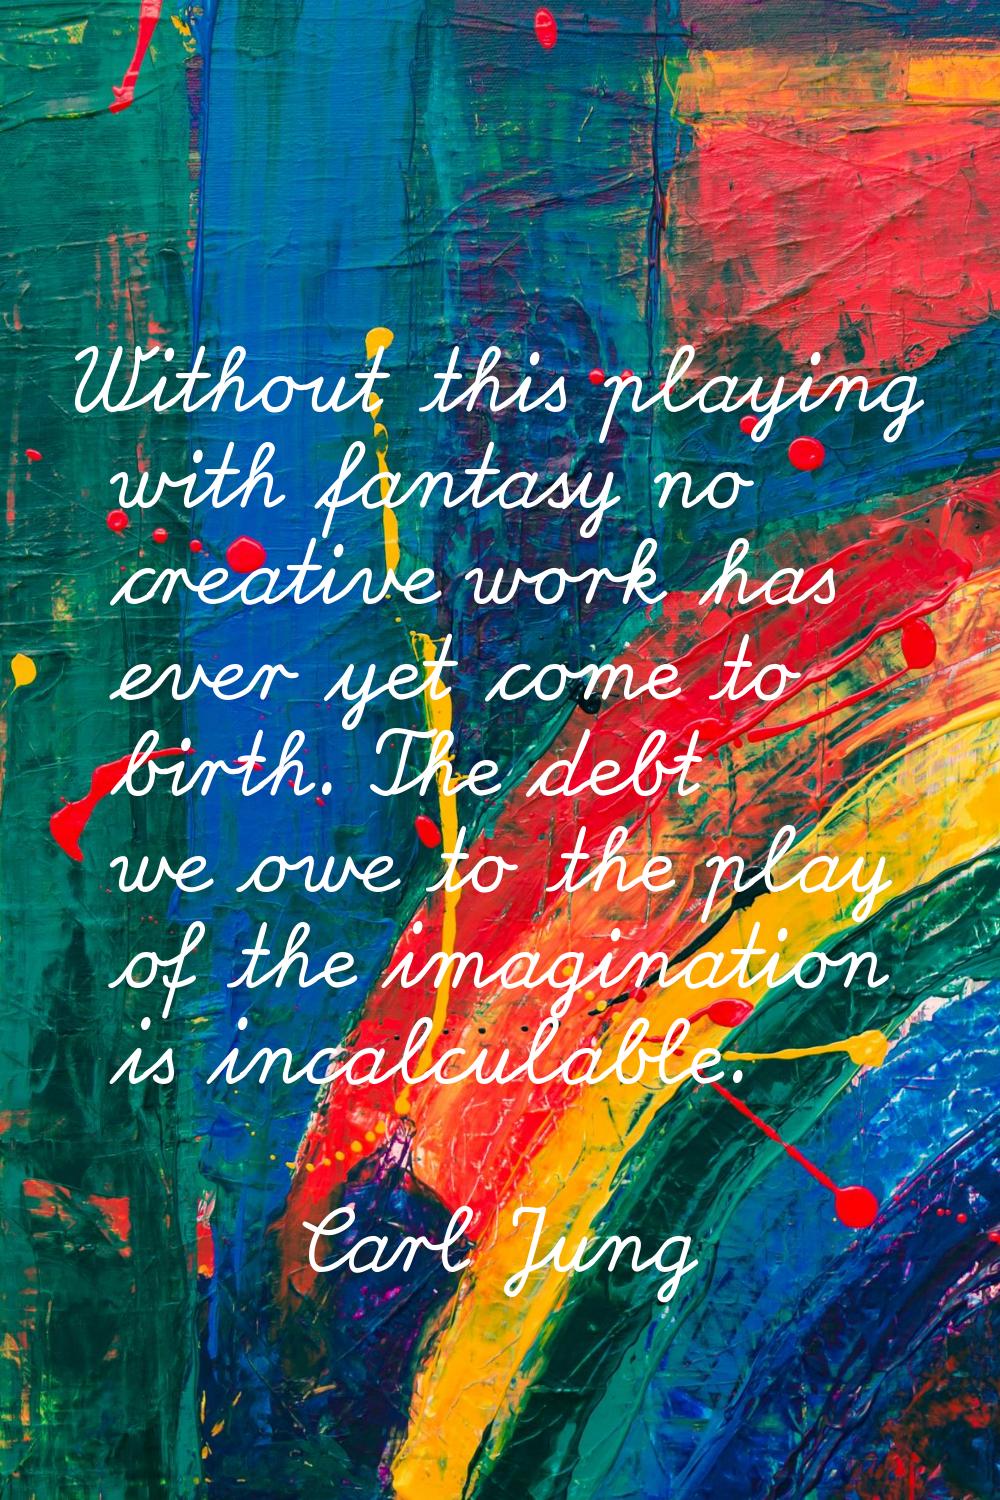 Without this playing with fantasy no creative work has ever yet come to birth. The debt we owe to t